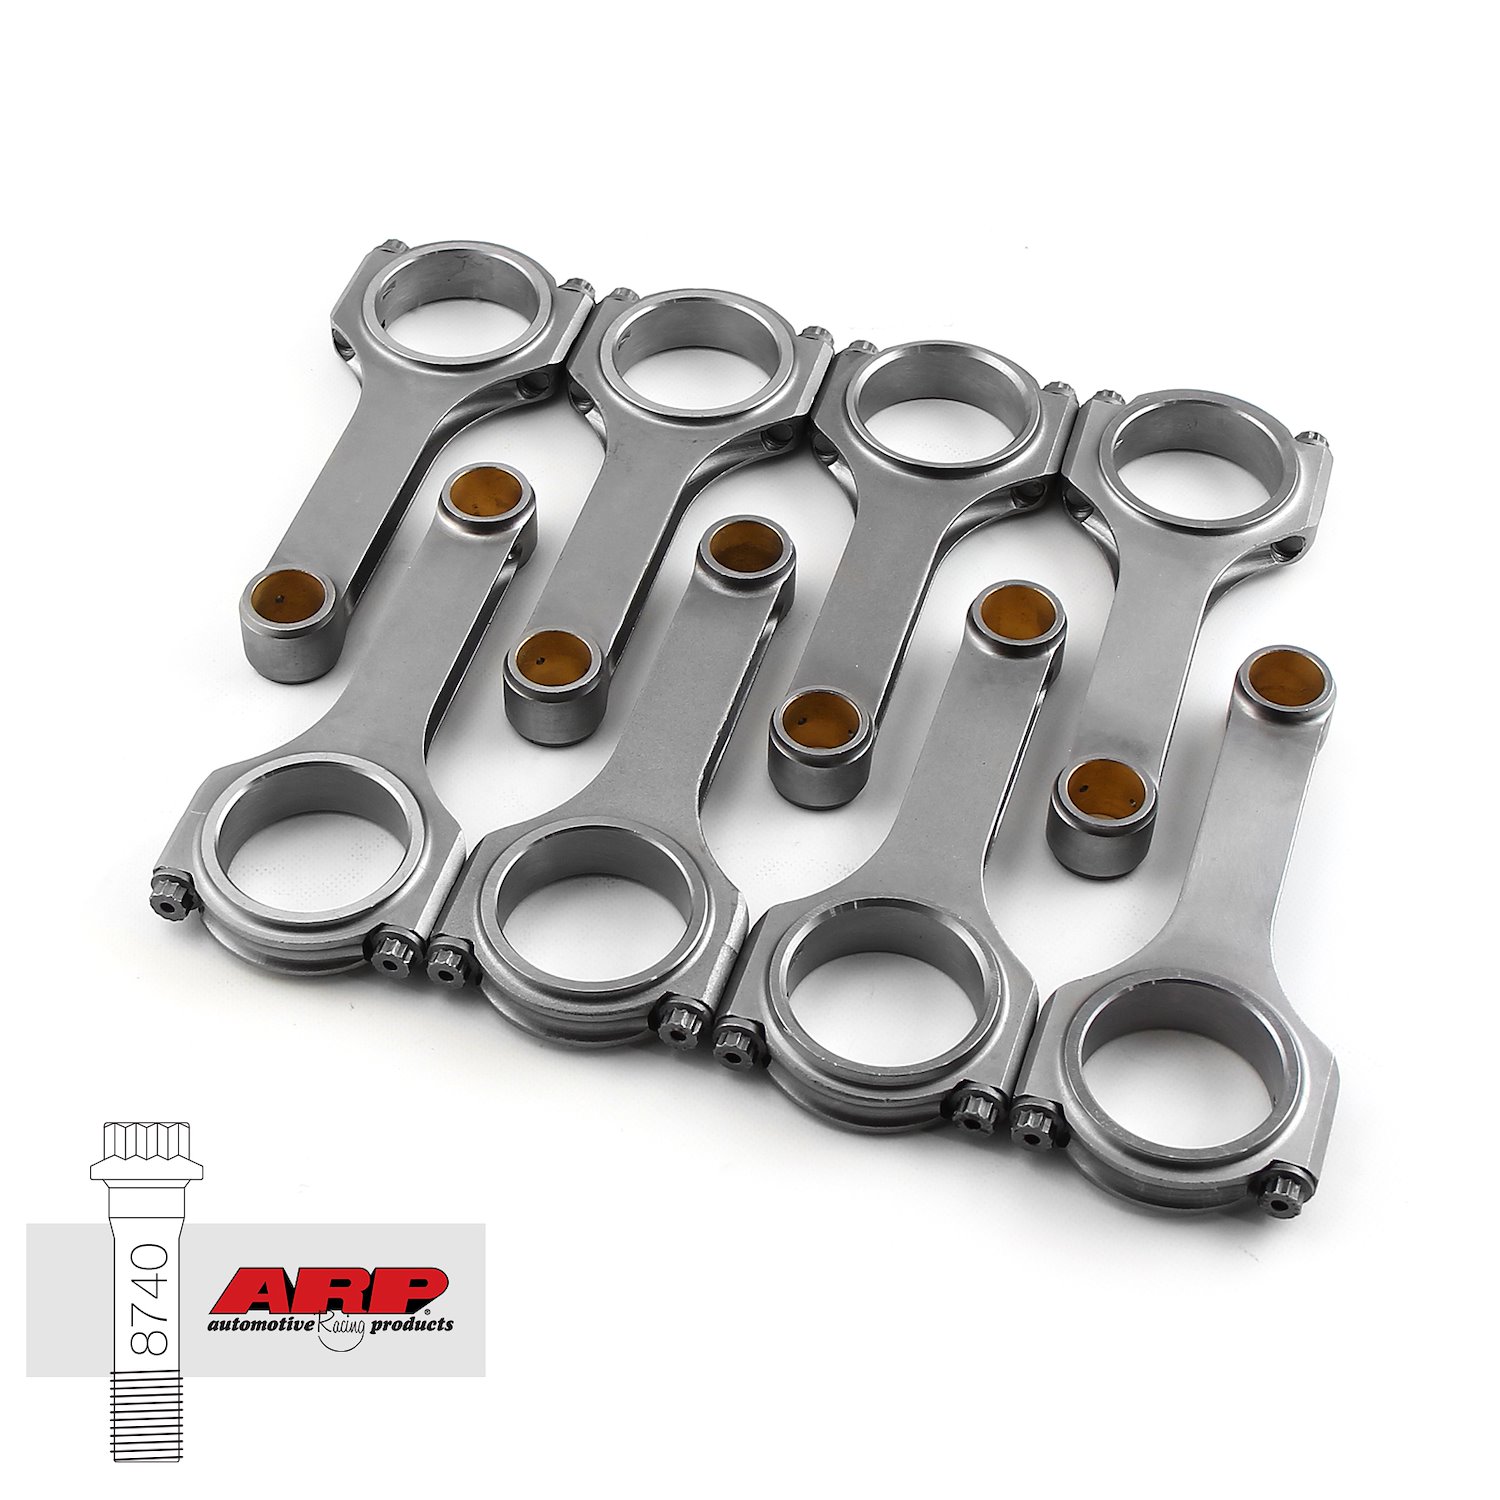 H BEAM 6.000 2.100 .927 4340 CONNECTING RODS